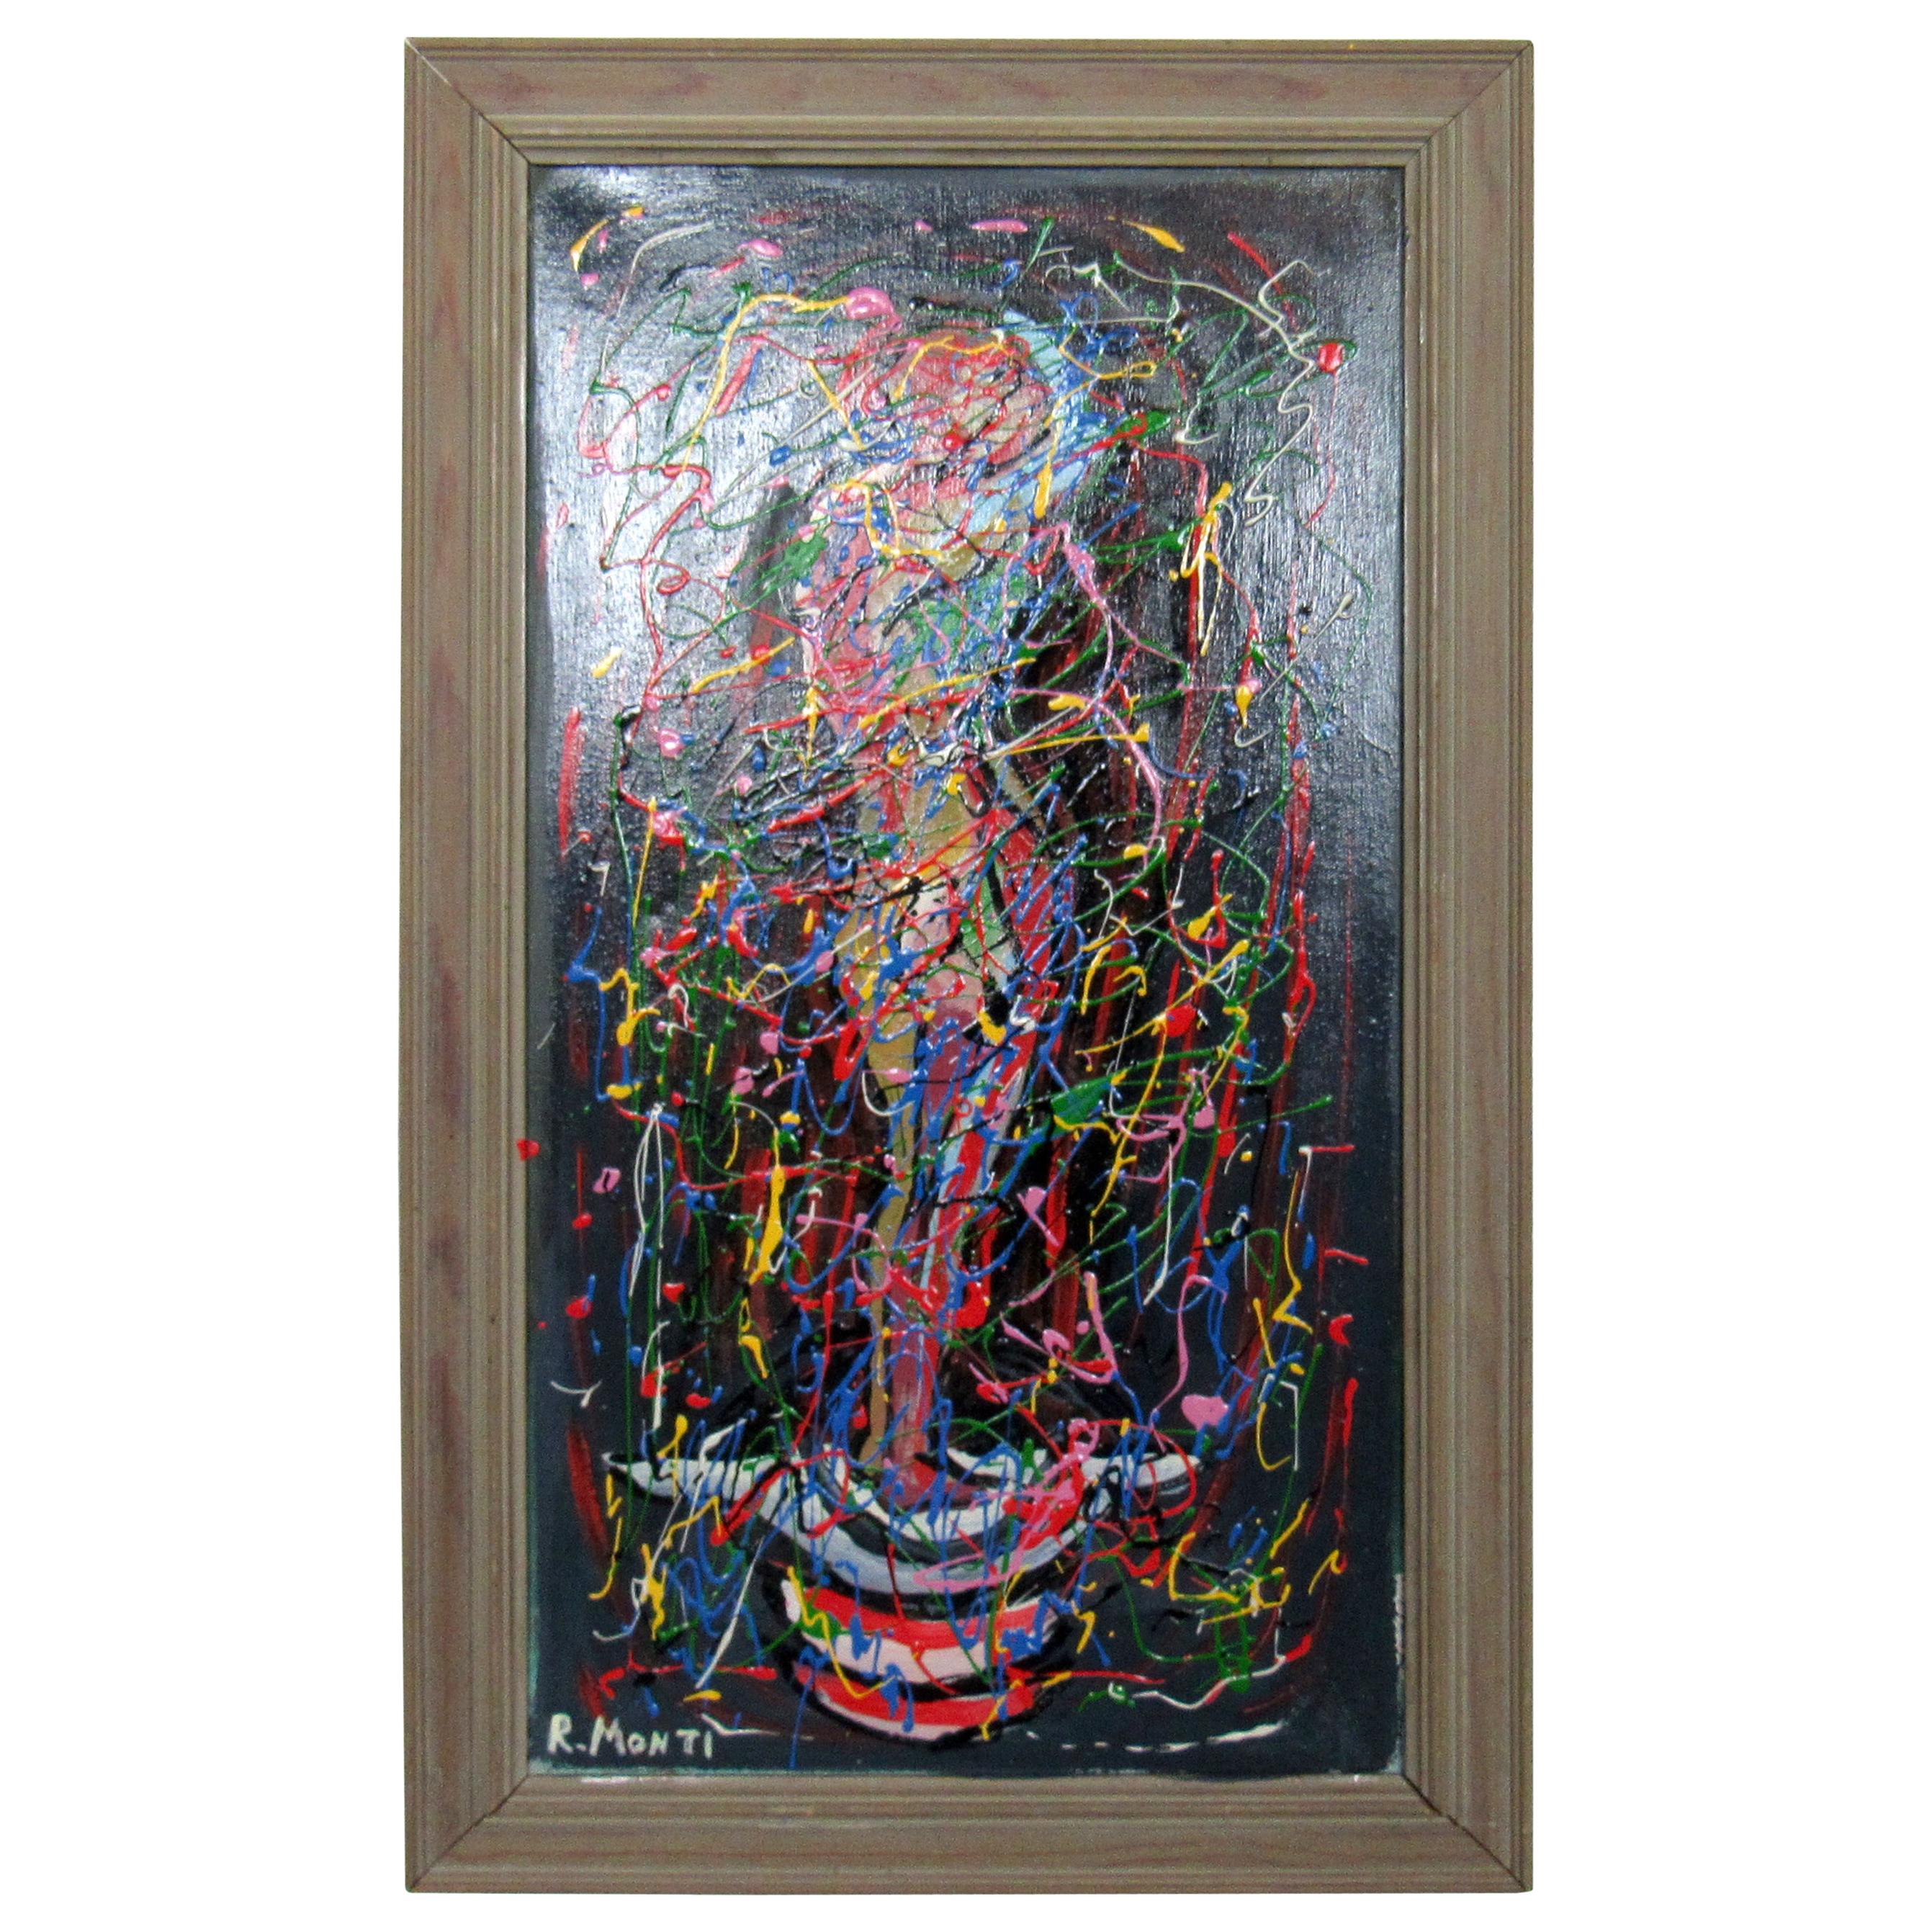 Abstract Oil Painting by R. Monti